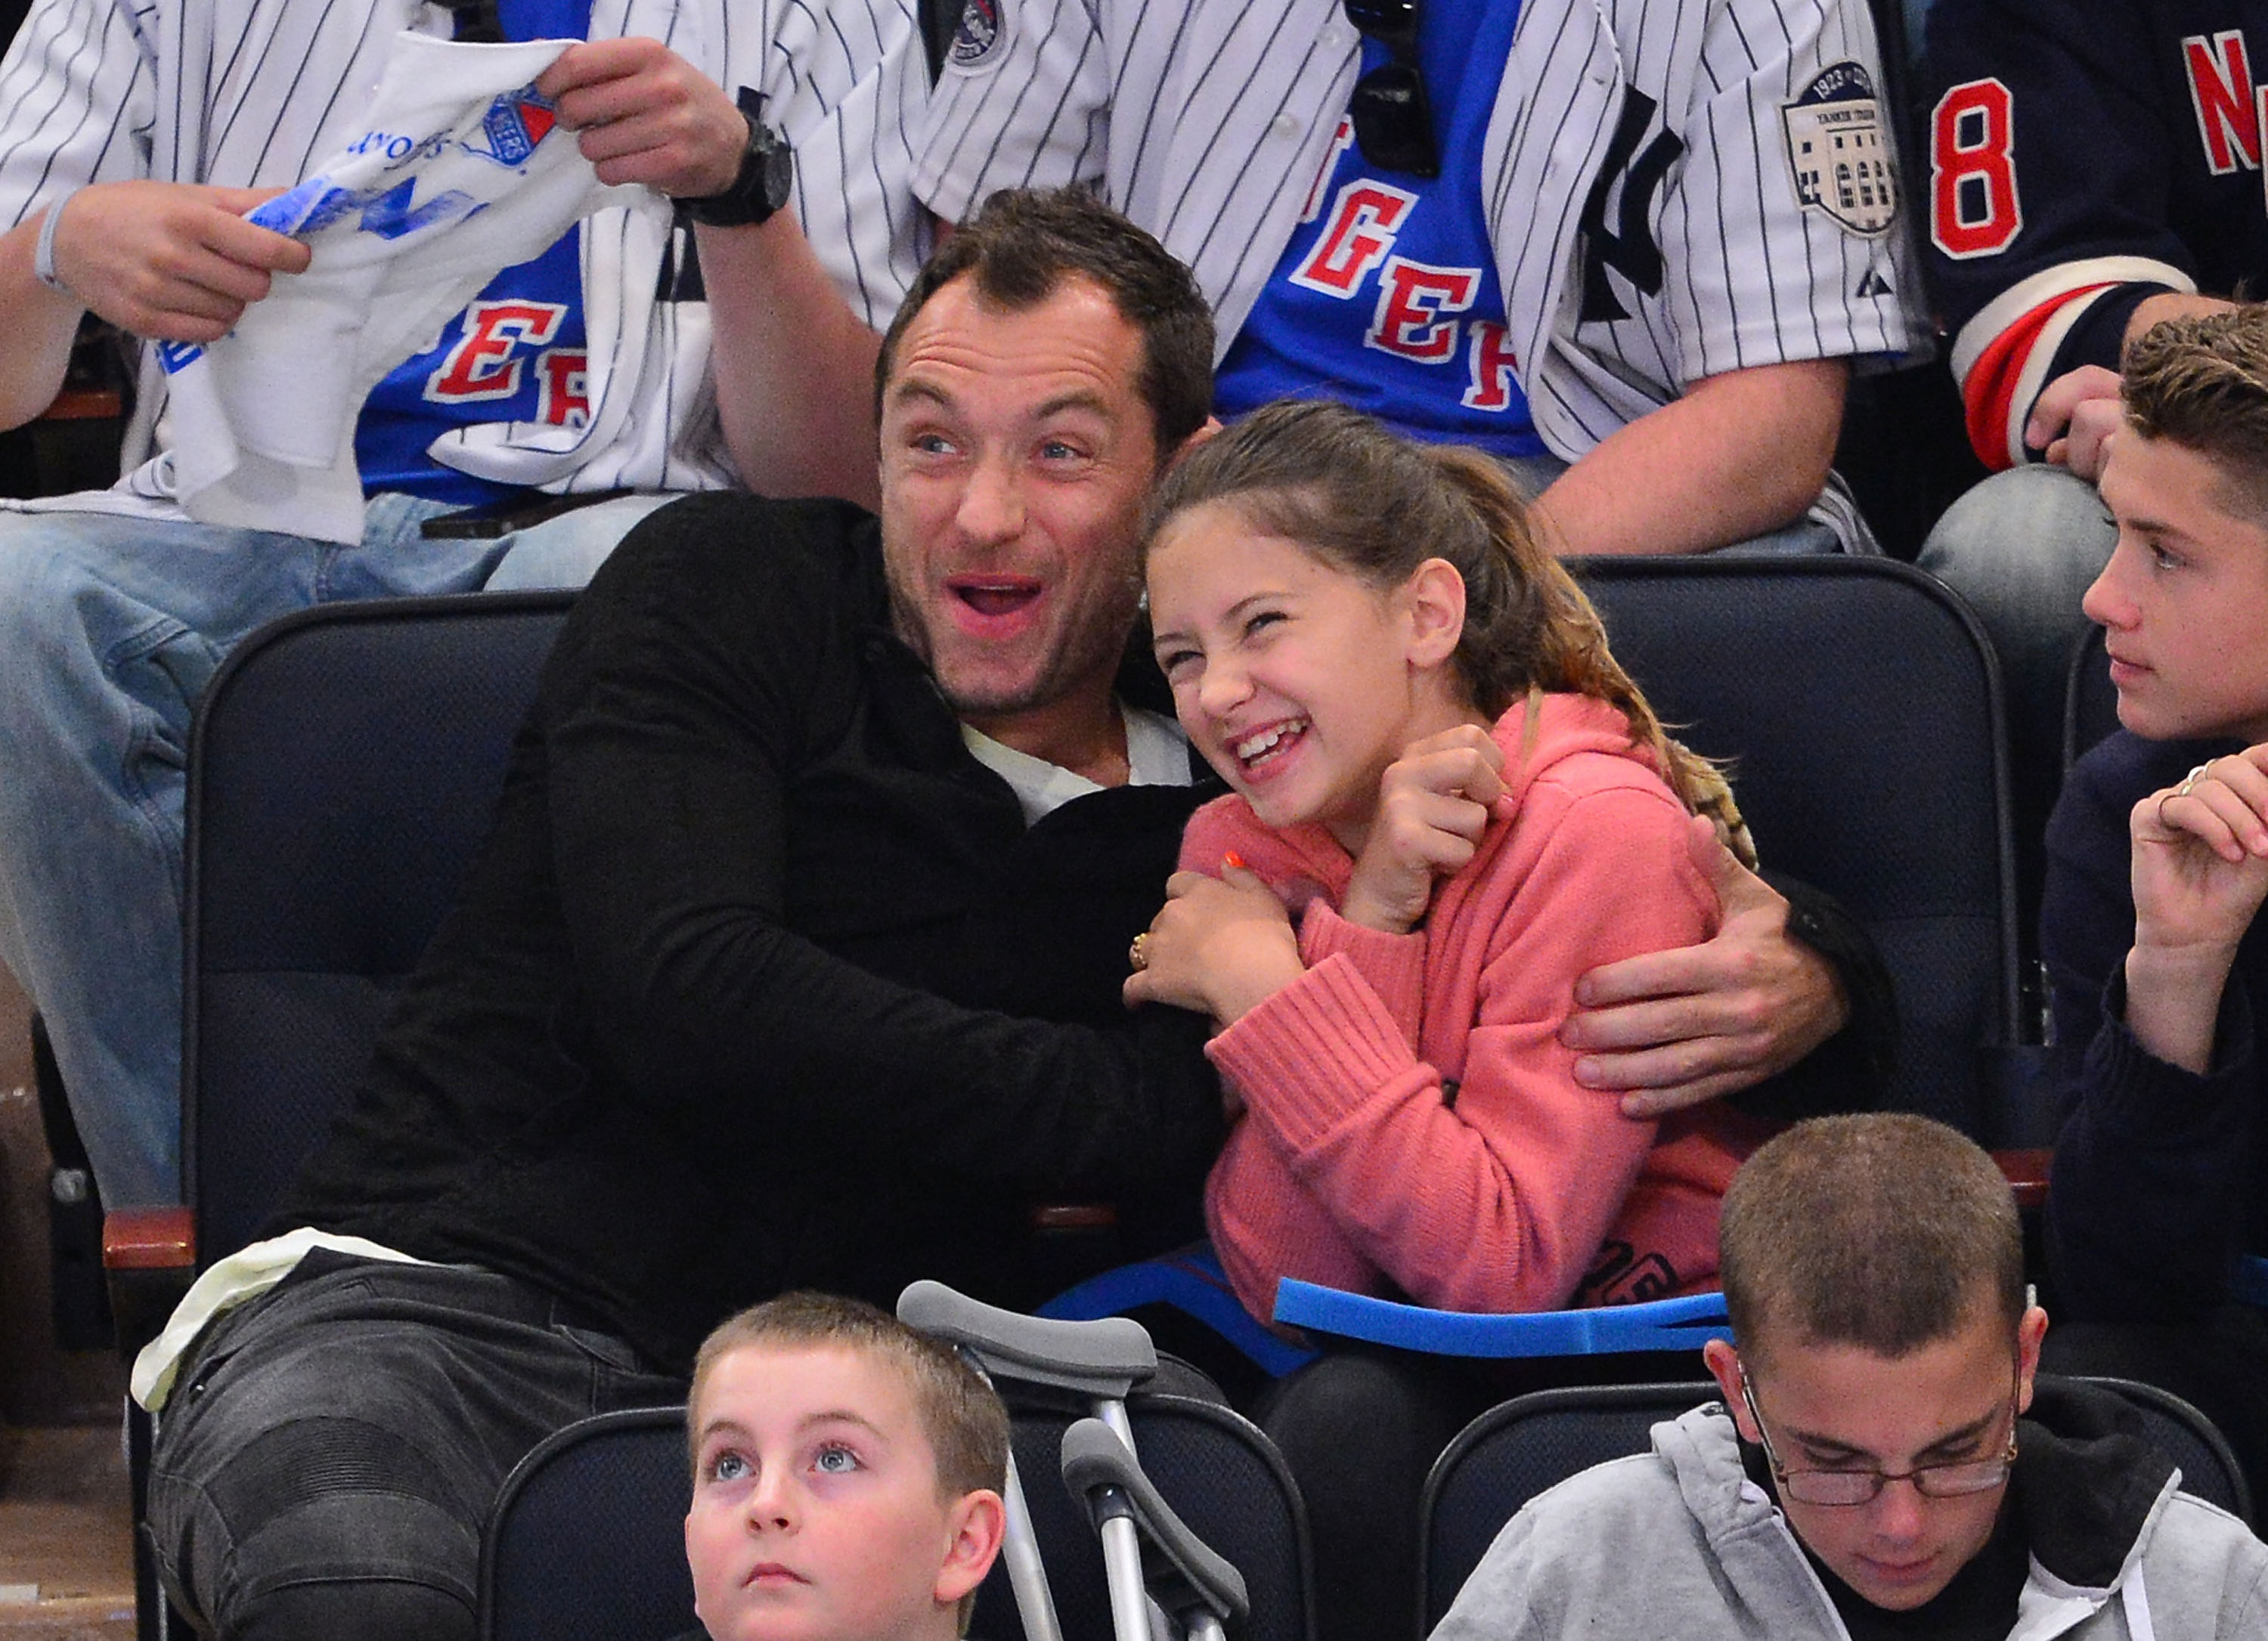 Jude Law and Iris Law attend the Ottawa Senators vs New York Rangers game at Madison Square Garden on April 14, 2012 in New York City | Source: Getty Images